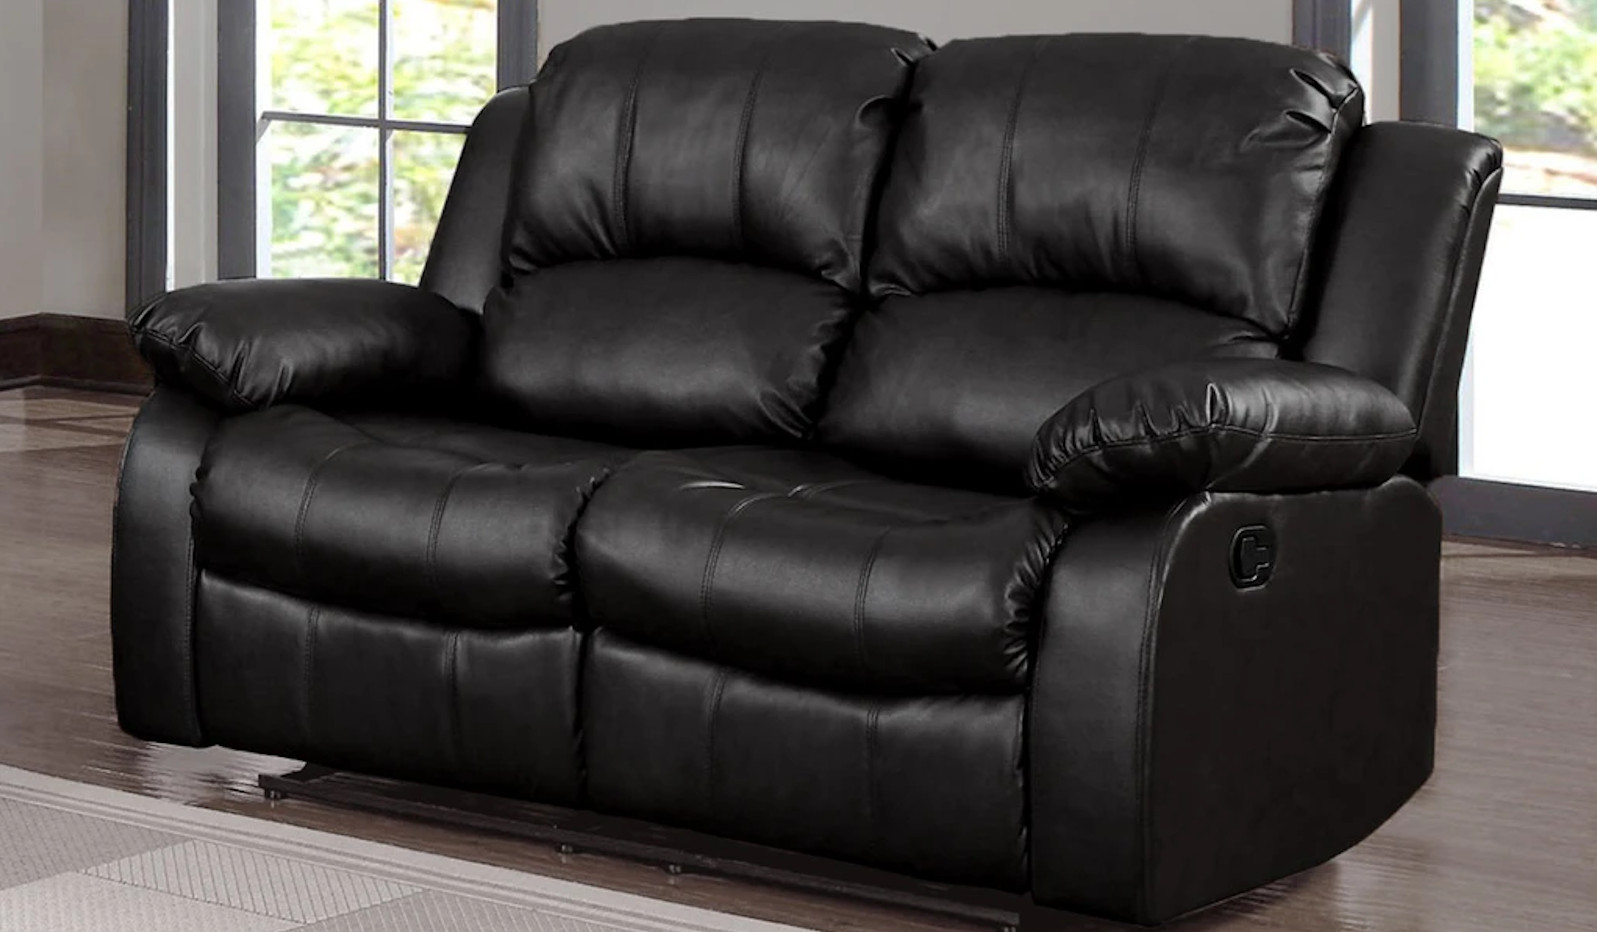 Cost-effective recliners